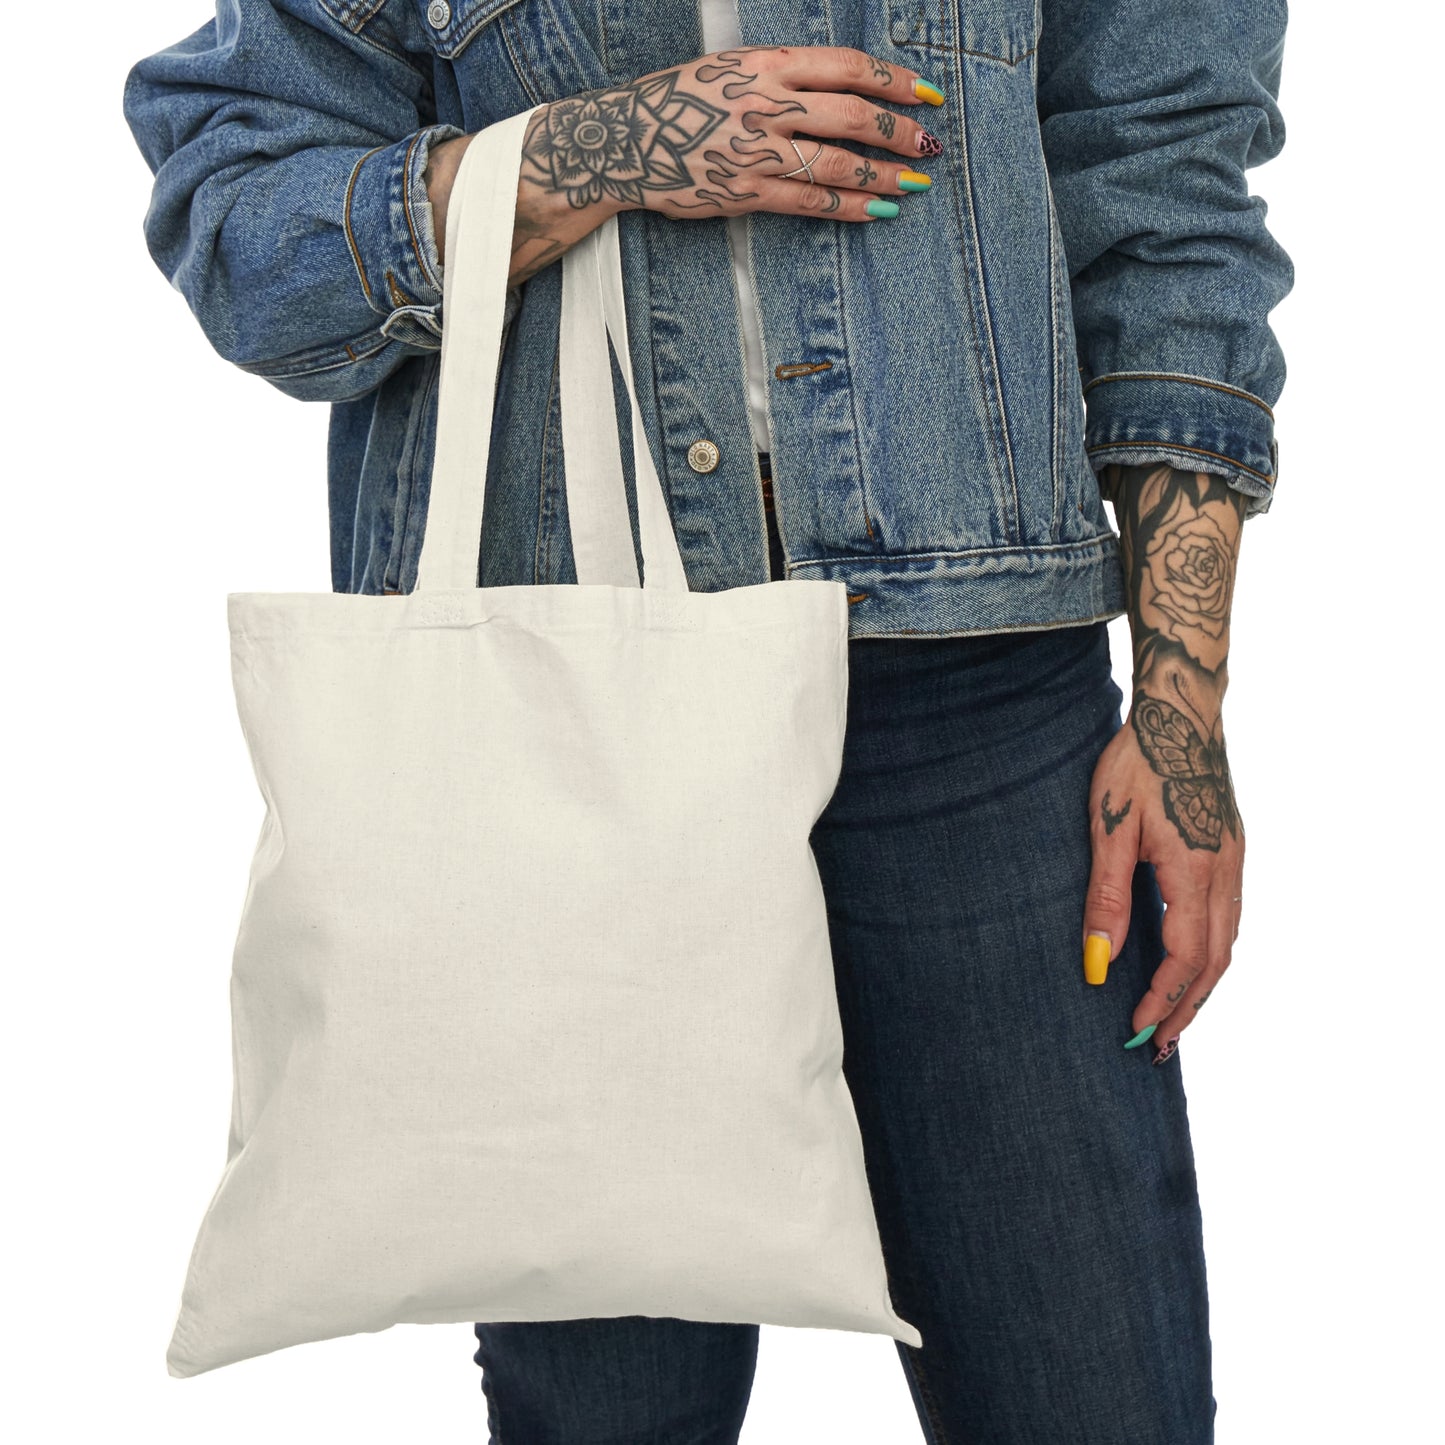 Now And Always - Natural Tote Bag